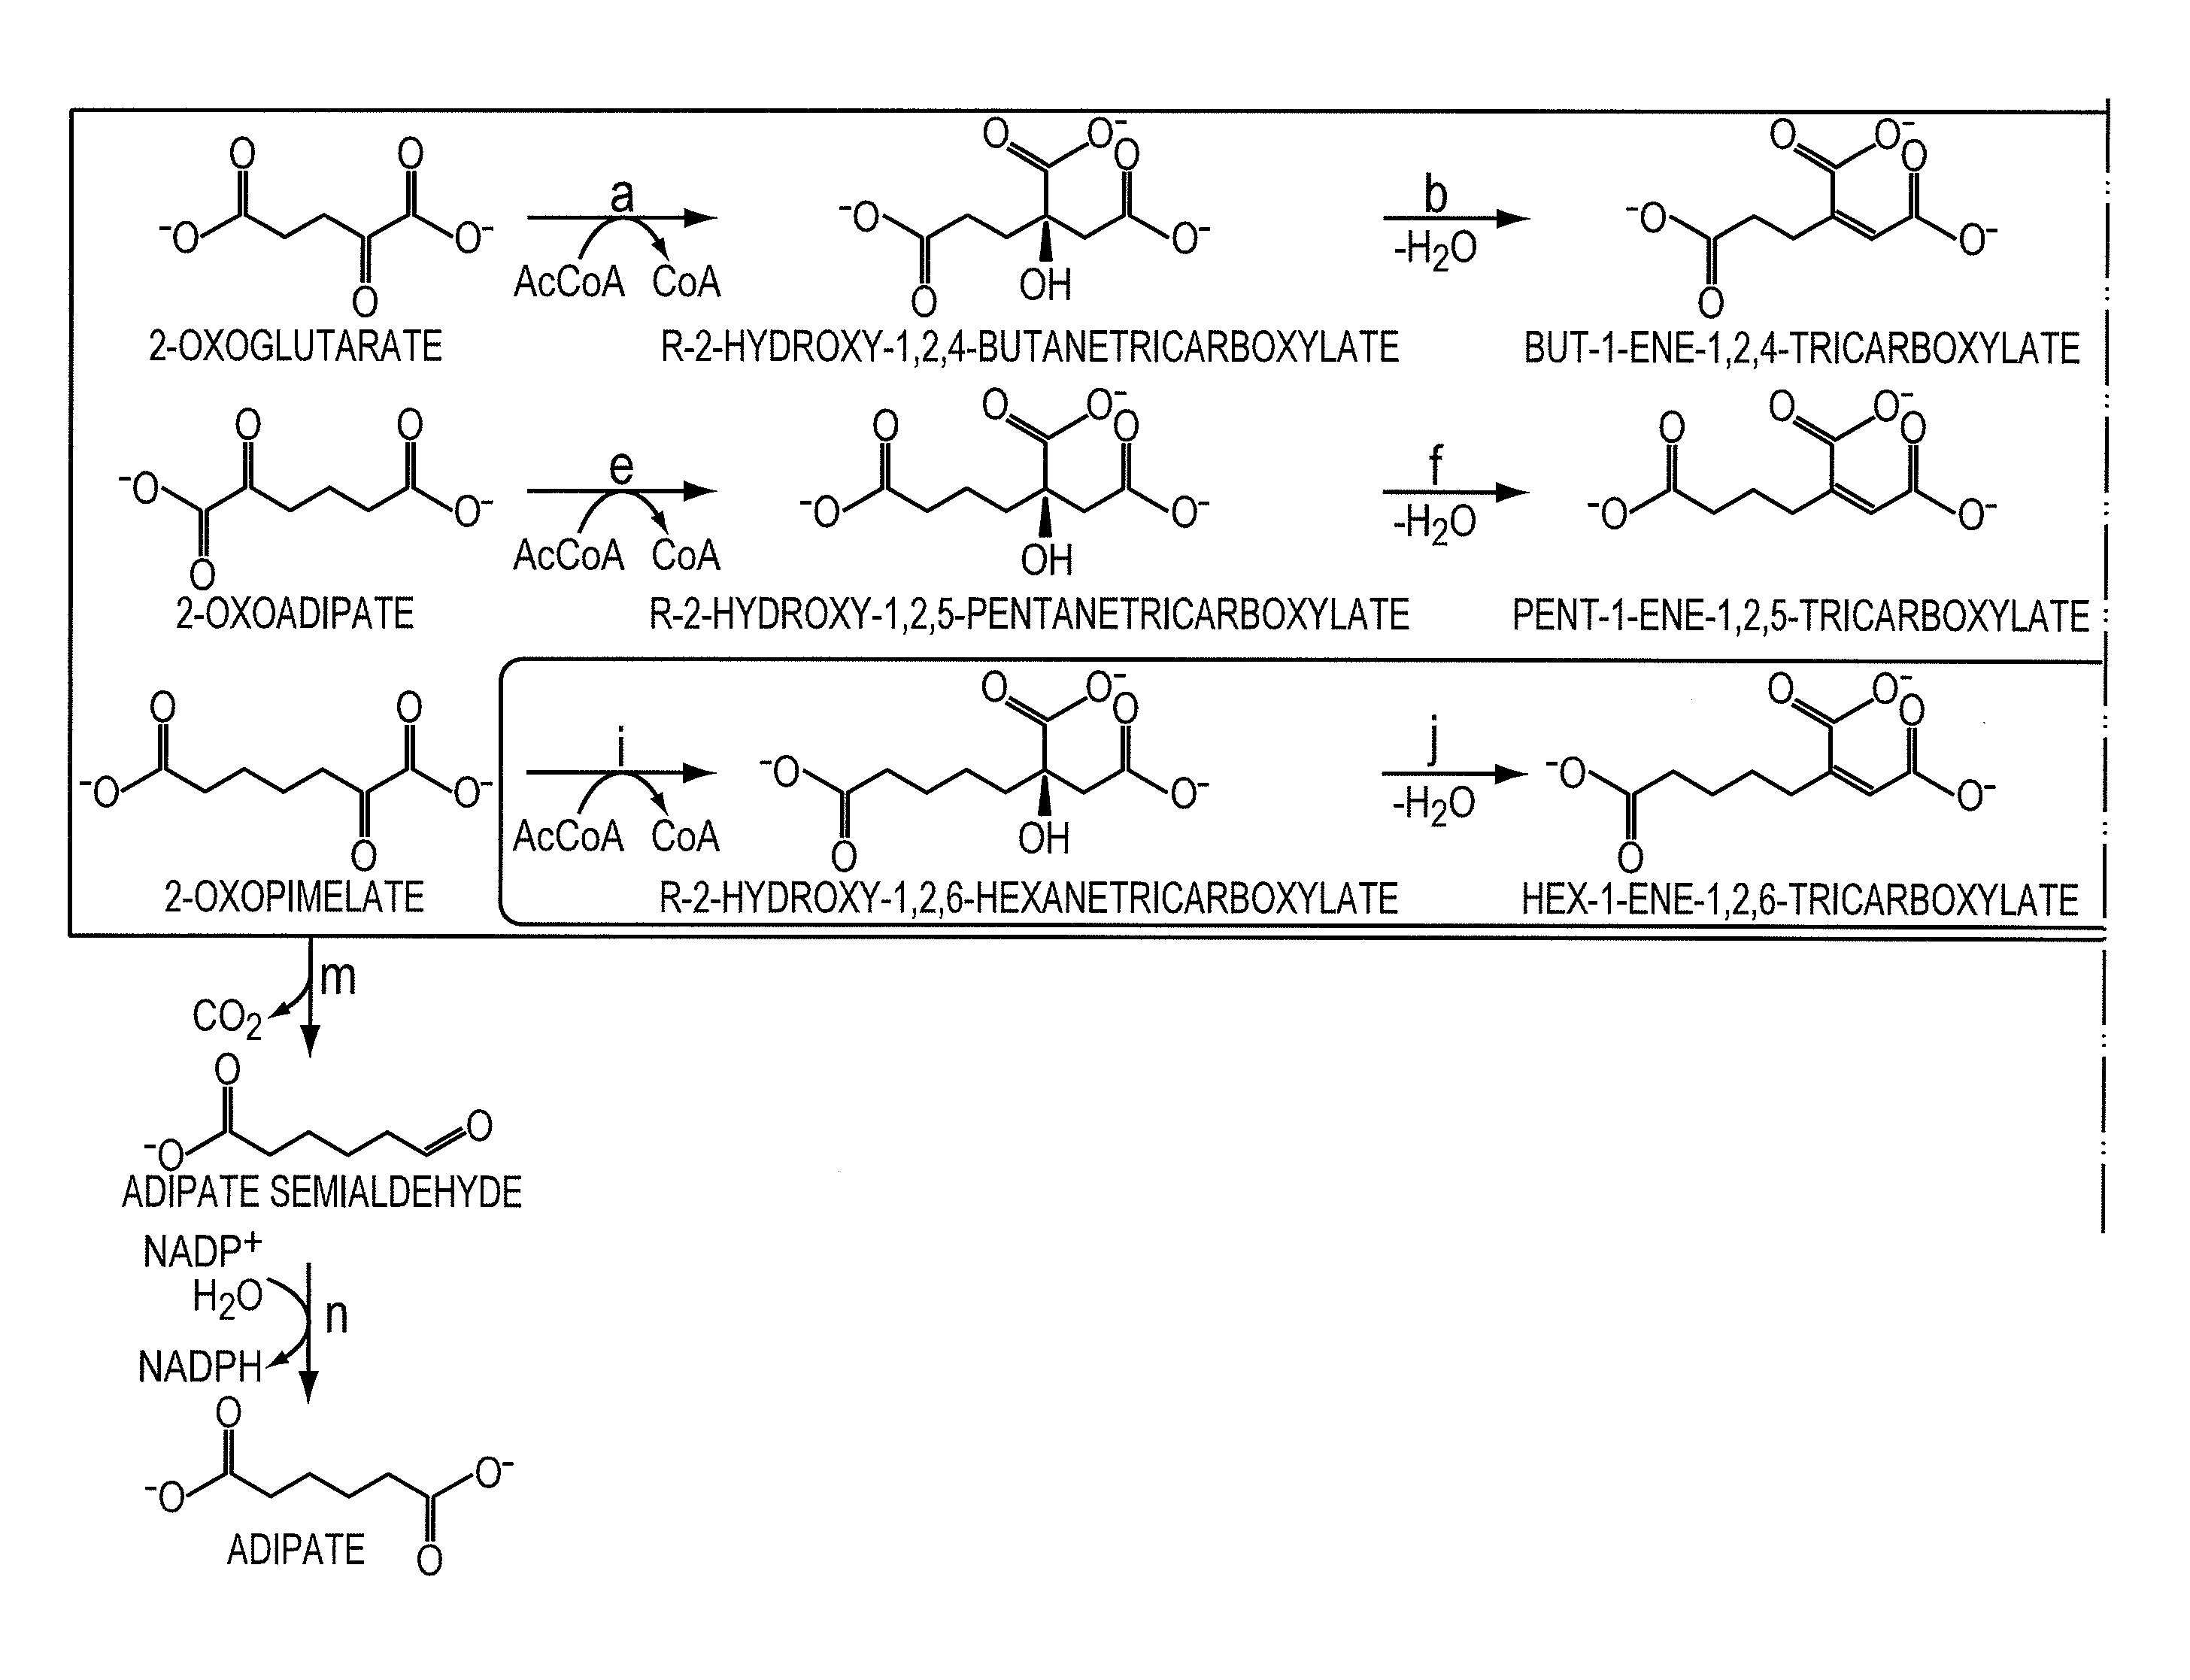 Biological Synthesis of Difunctional Alkanes from Carbohydrate Feedstocks